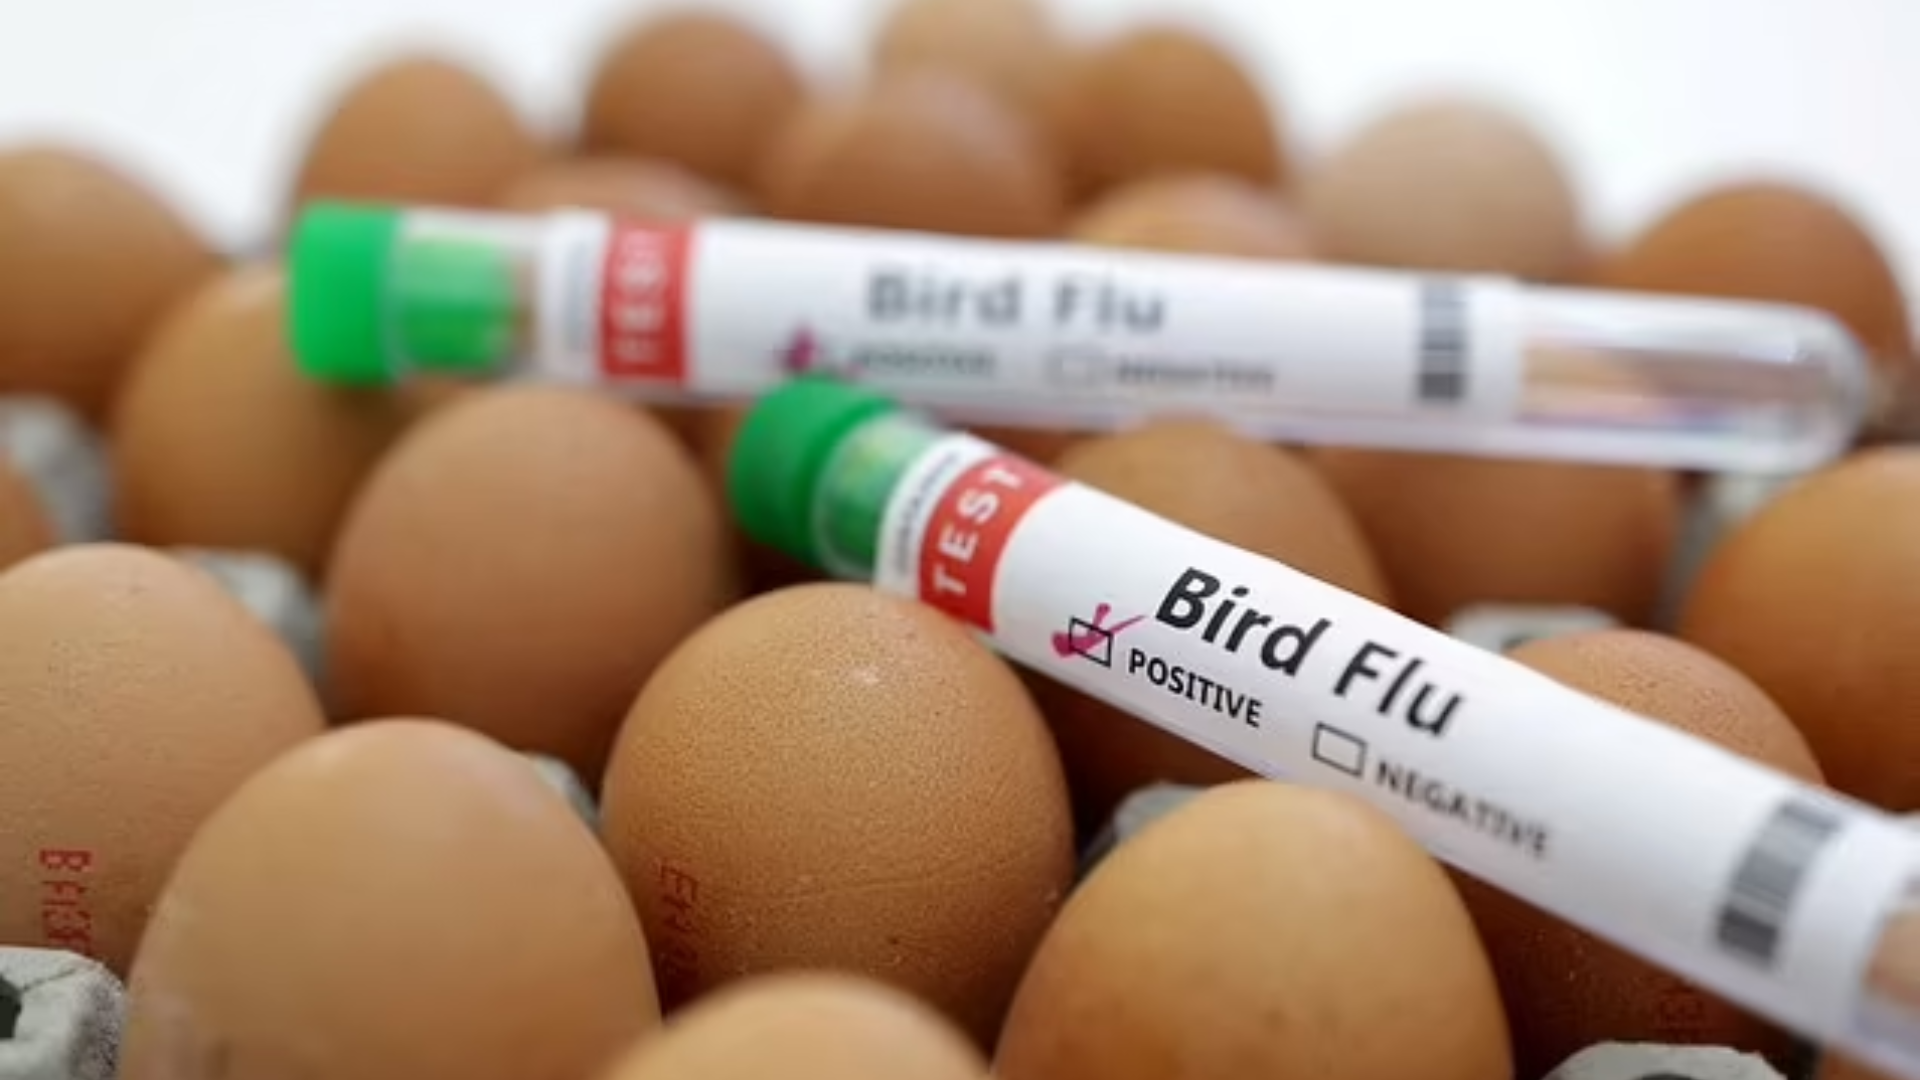 CDC Issues Alert For H5N1 Avian Influenza Infection In The US